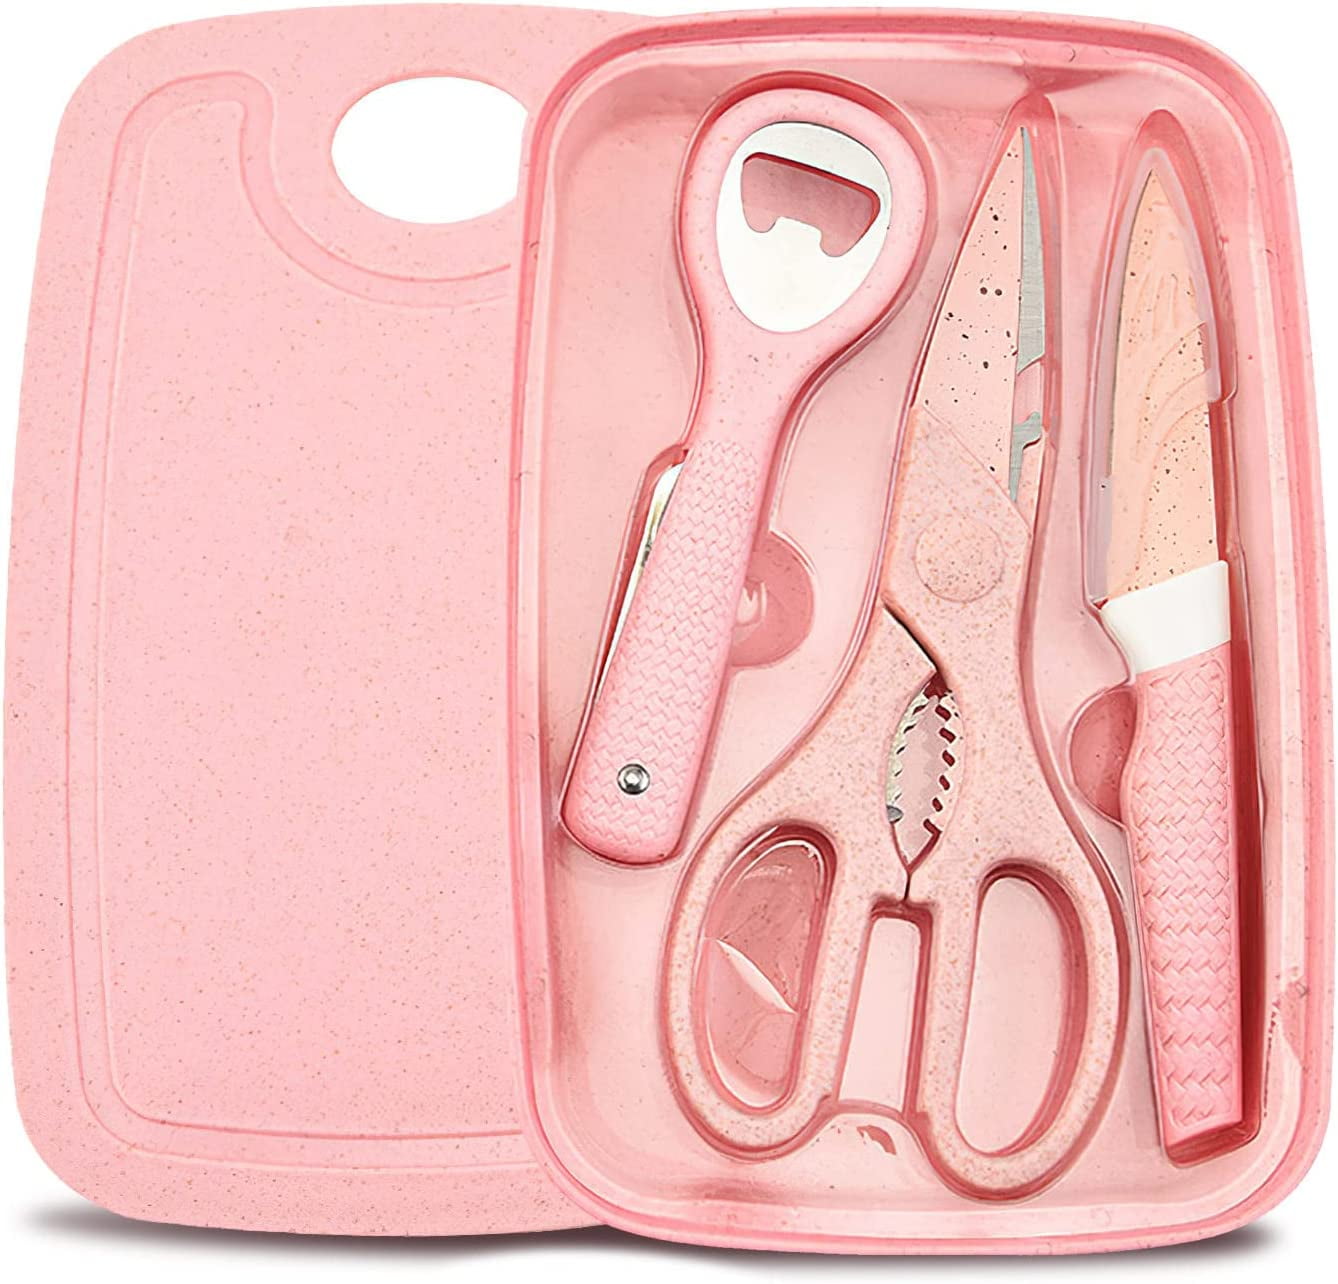 NEW PINK PLASTIC CUTTING BOARD Poratable CAMPING Home